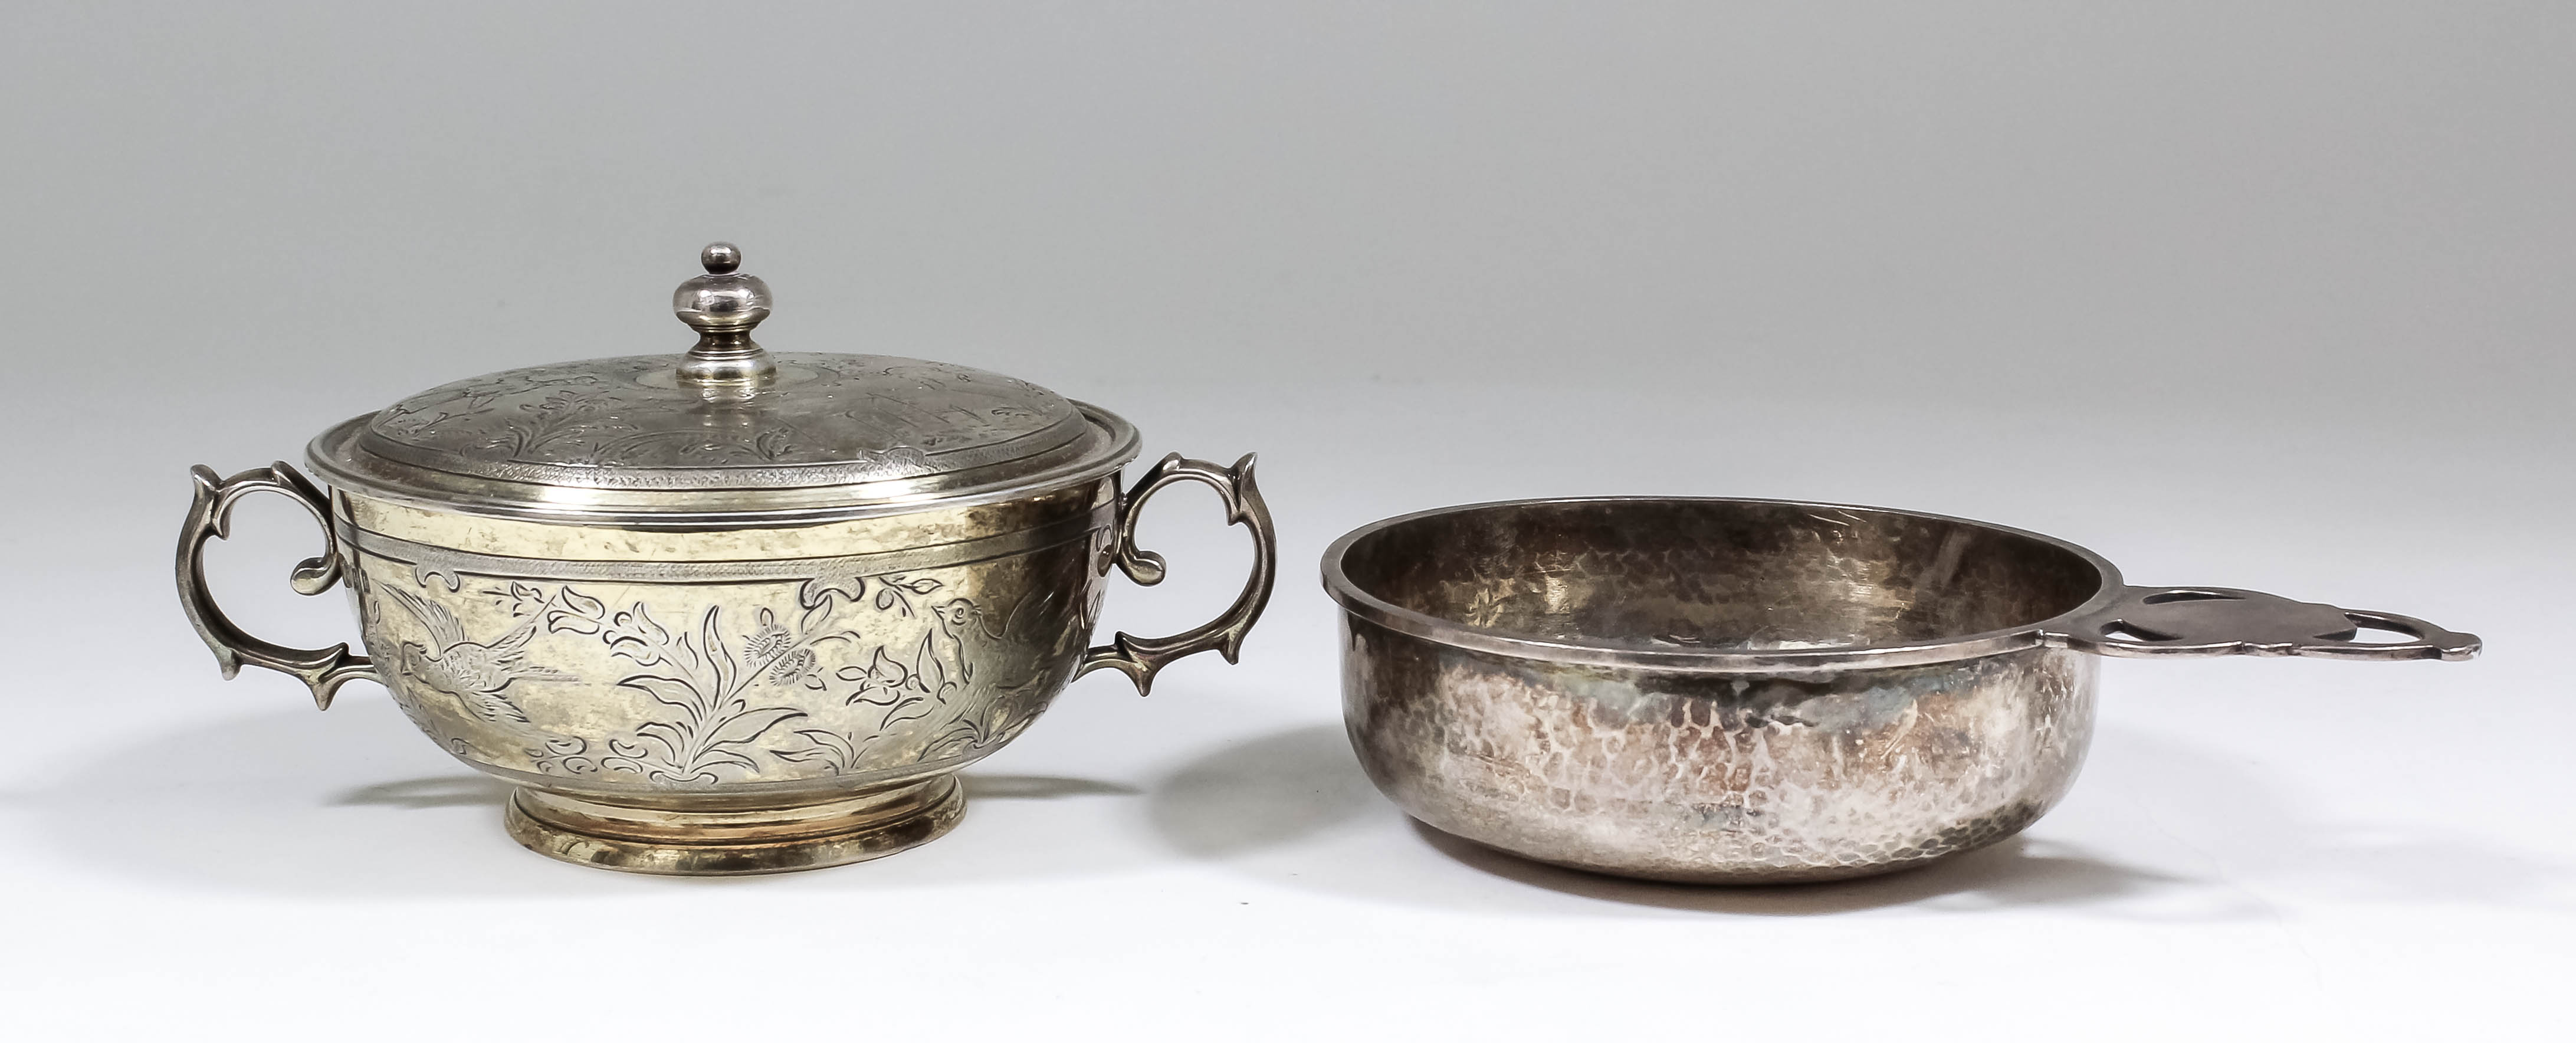 An Edward VII silver gilt circular two-handled porringer and cover engraved in the "17th Century"